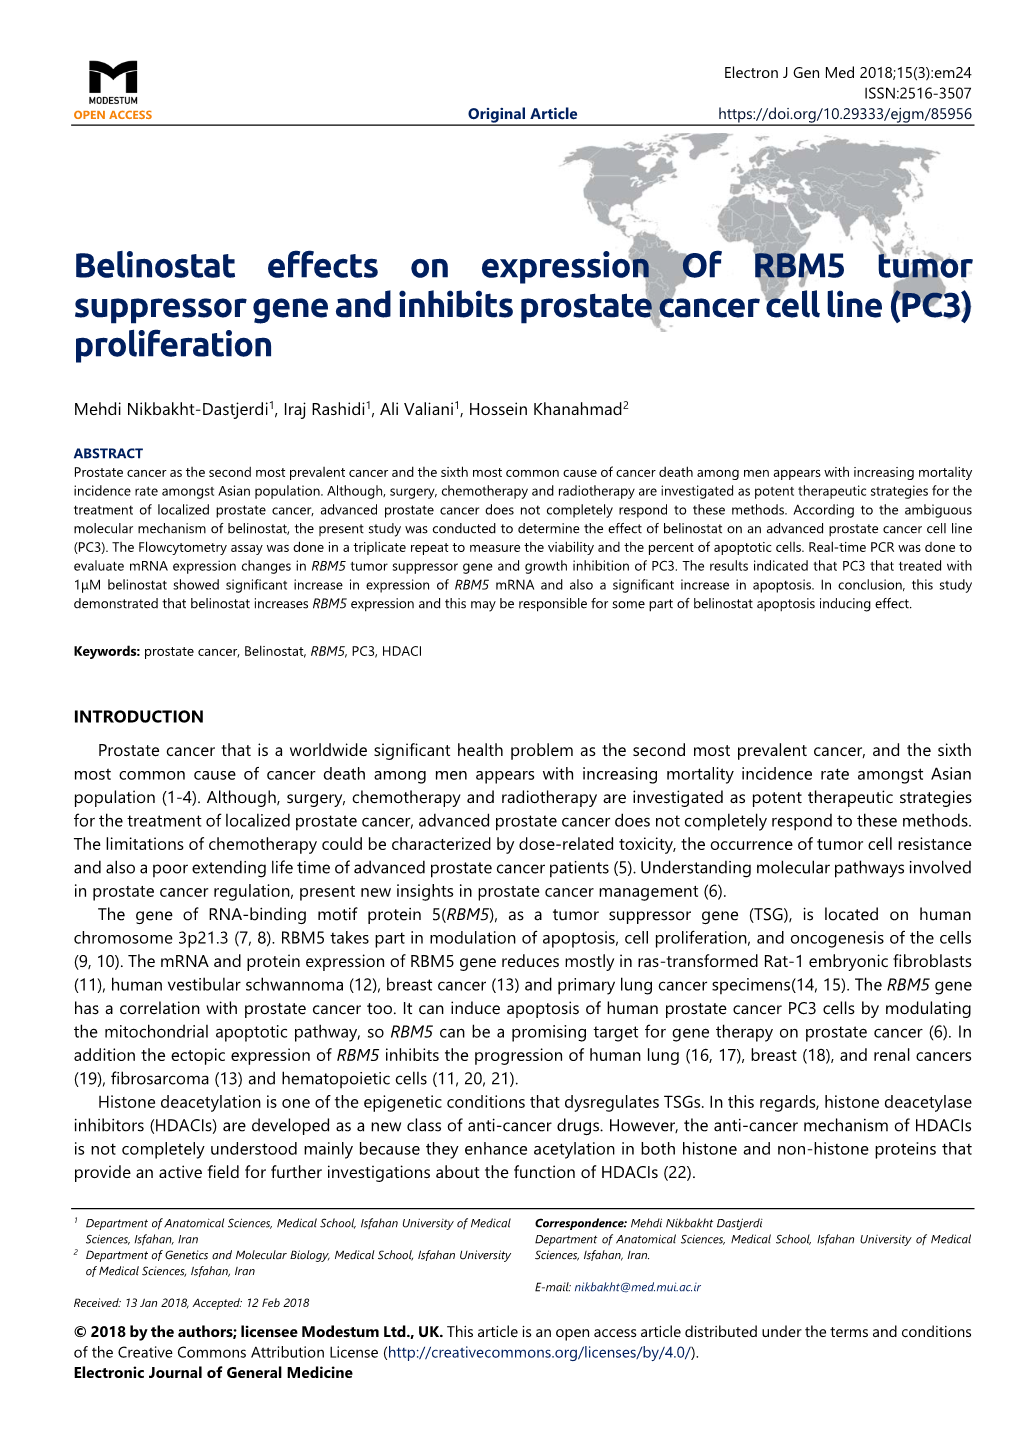 Belinostat Effects on Expression of RBM5 Tumor Suppressor Gene and Inhibits Prostate Cancer Cell Line (PC3) Proliferation